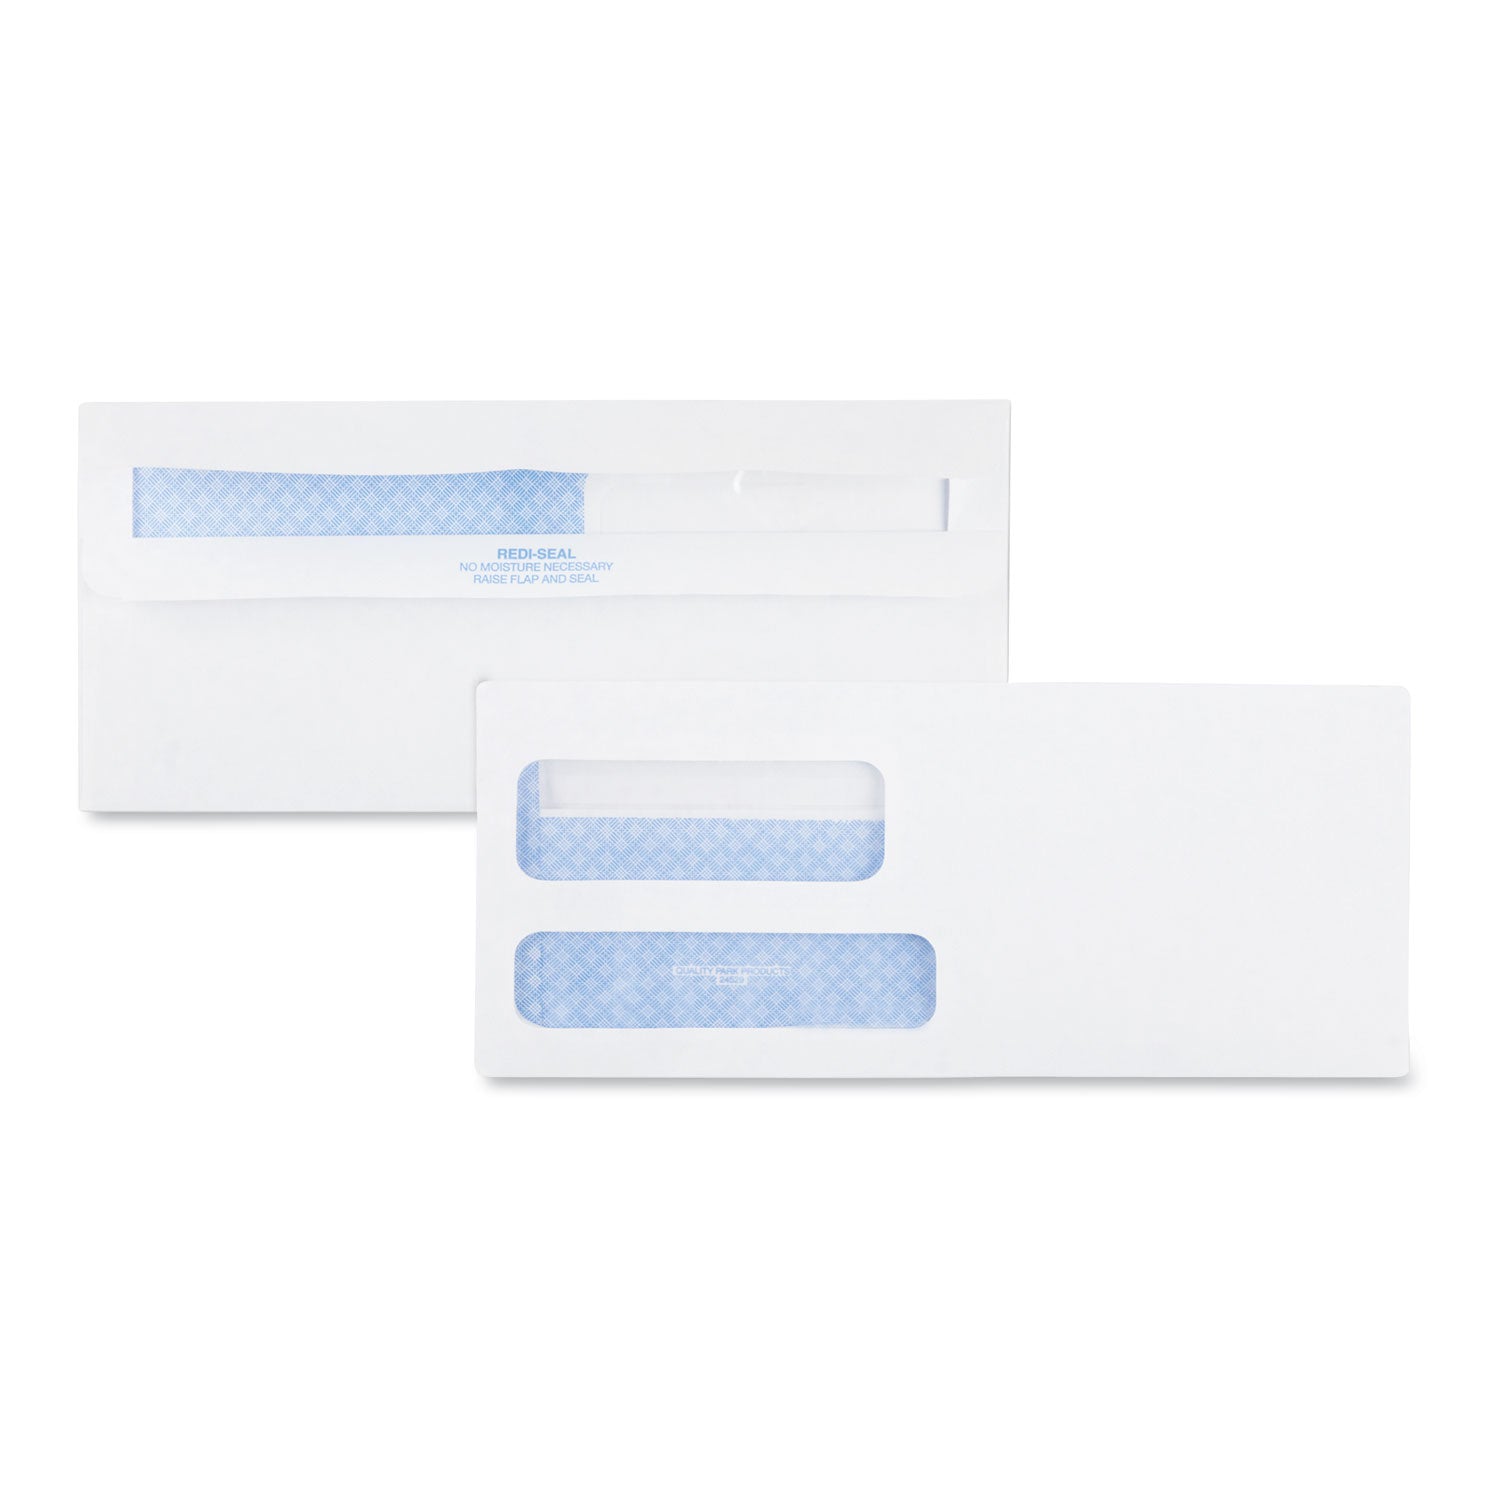 Double Window Redi-Seal Security-Tinted Envelope, #9, Commercial Flap, Redi-Seal Adhesive Closure, 3.88 x 8.88, White, 500/BX - 